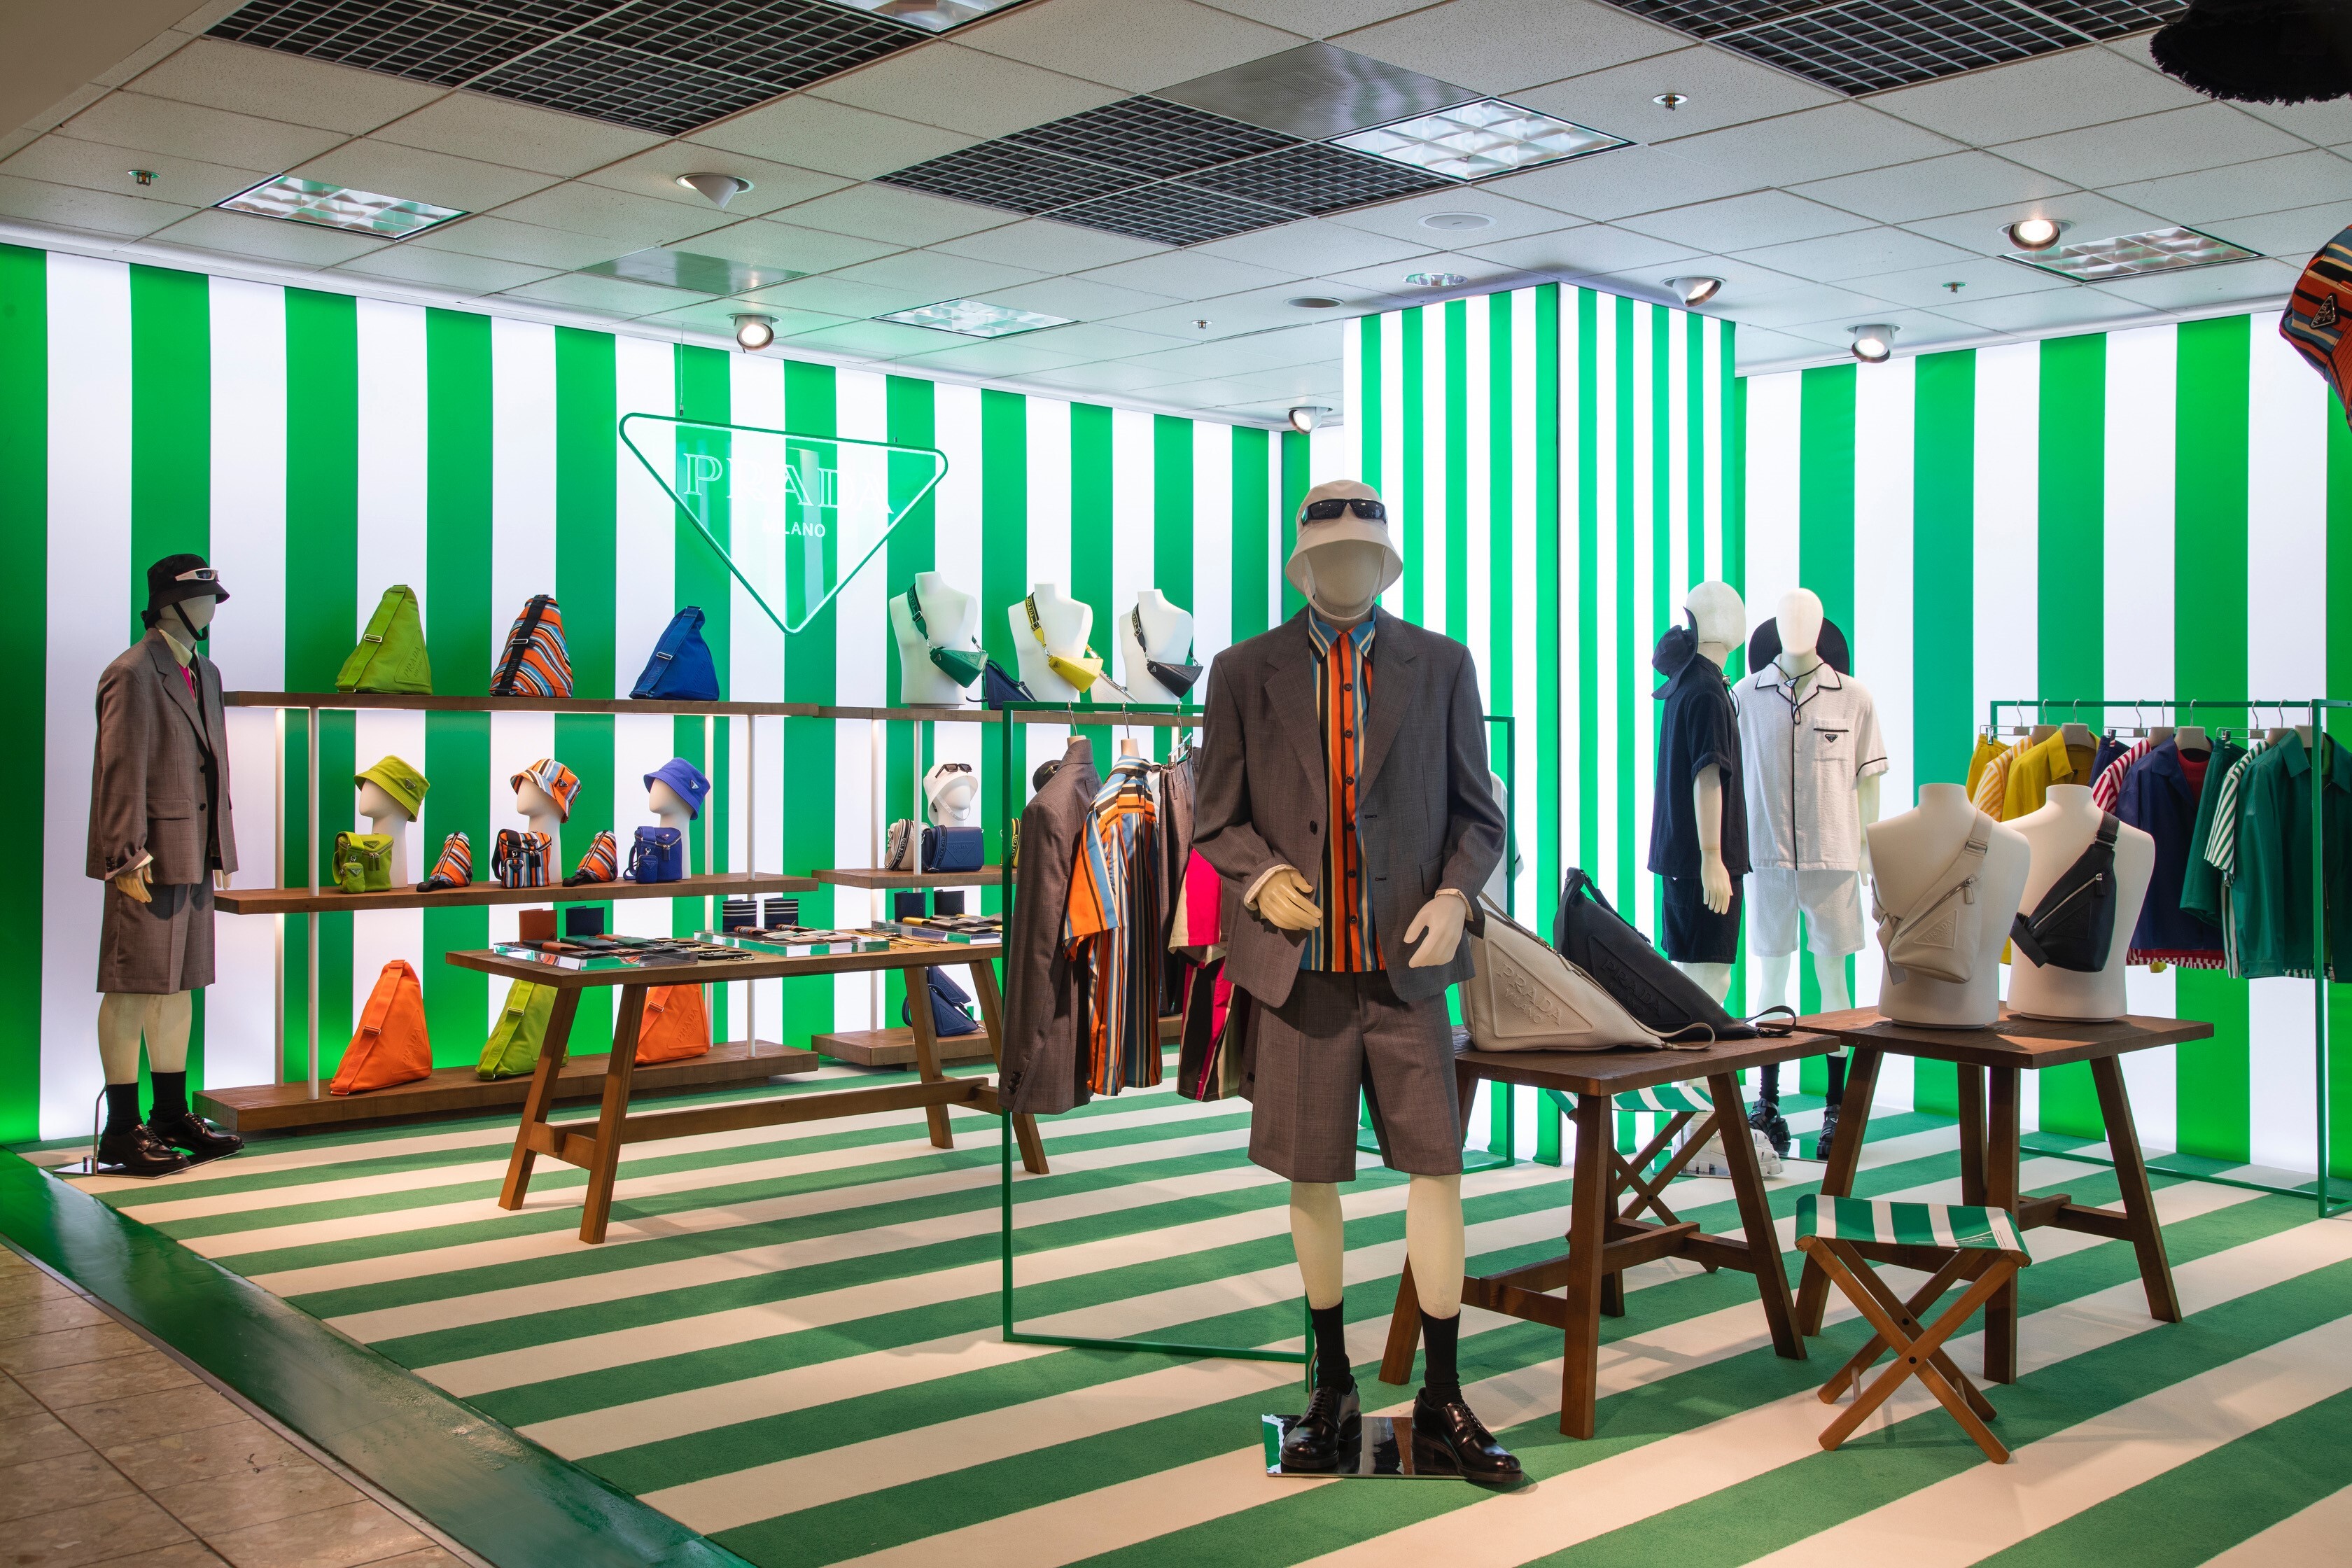 Neiman Marcus NorthPark Welcomes an Exclusive Prada Pop-Up – Inside the  Immersive Summer Experience